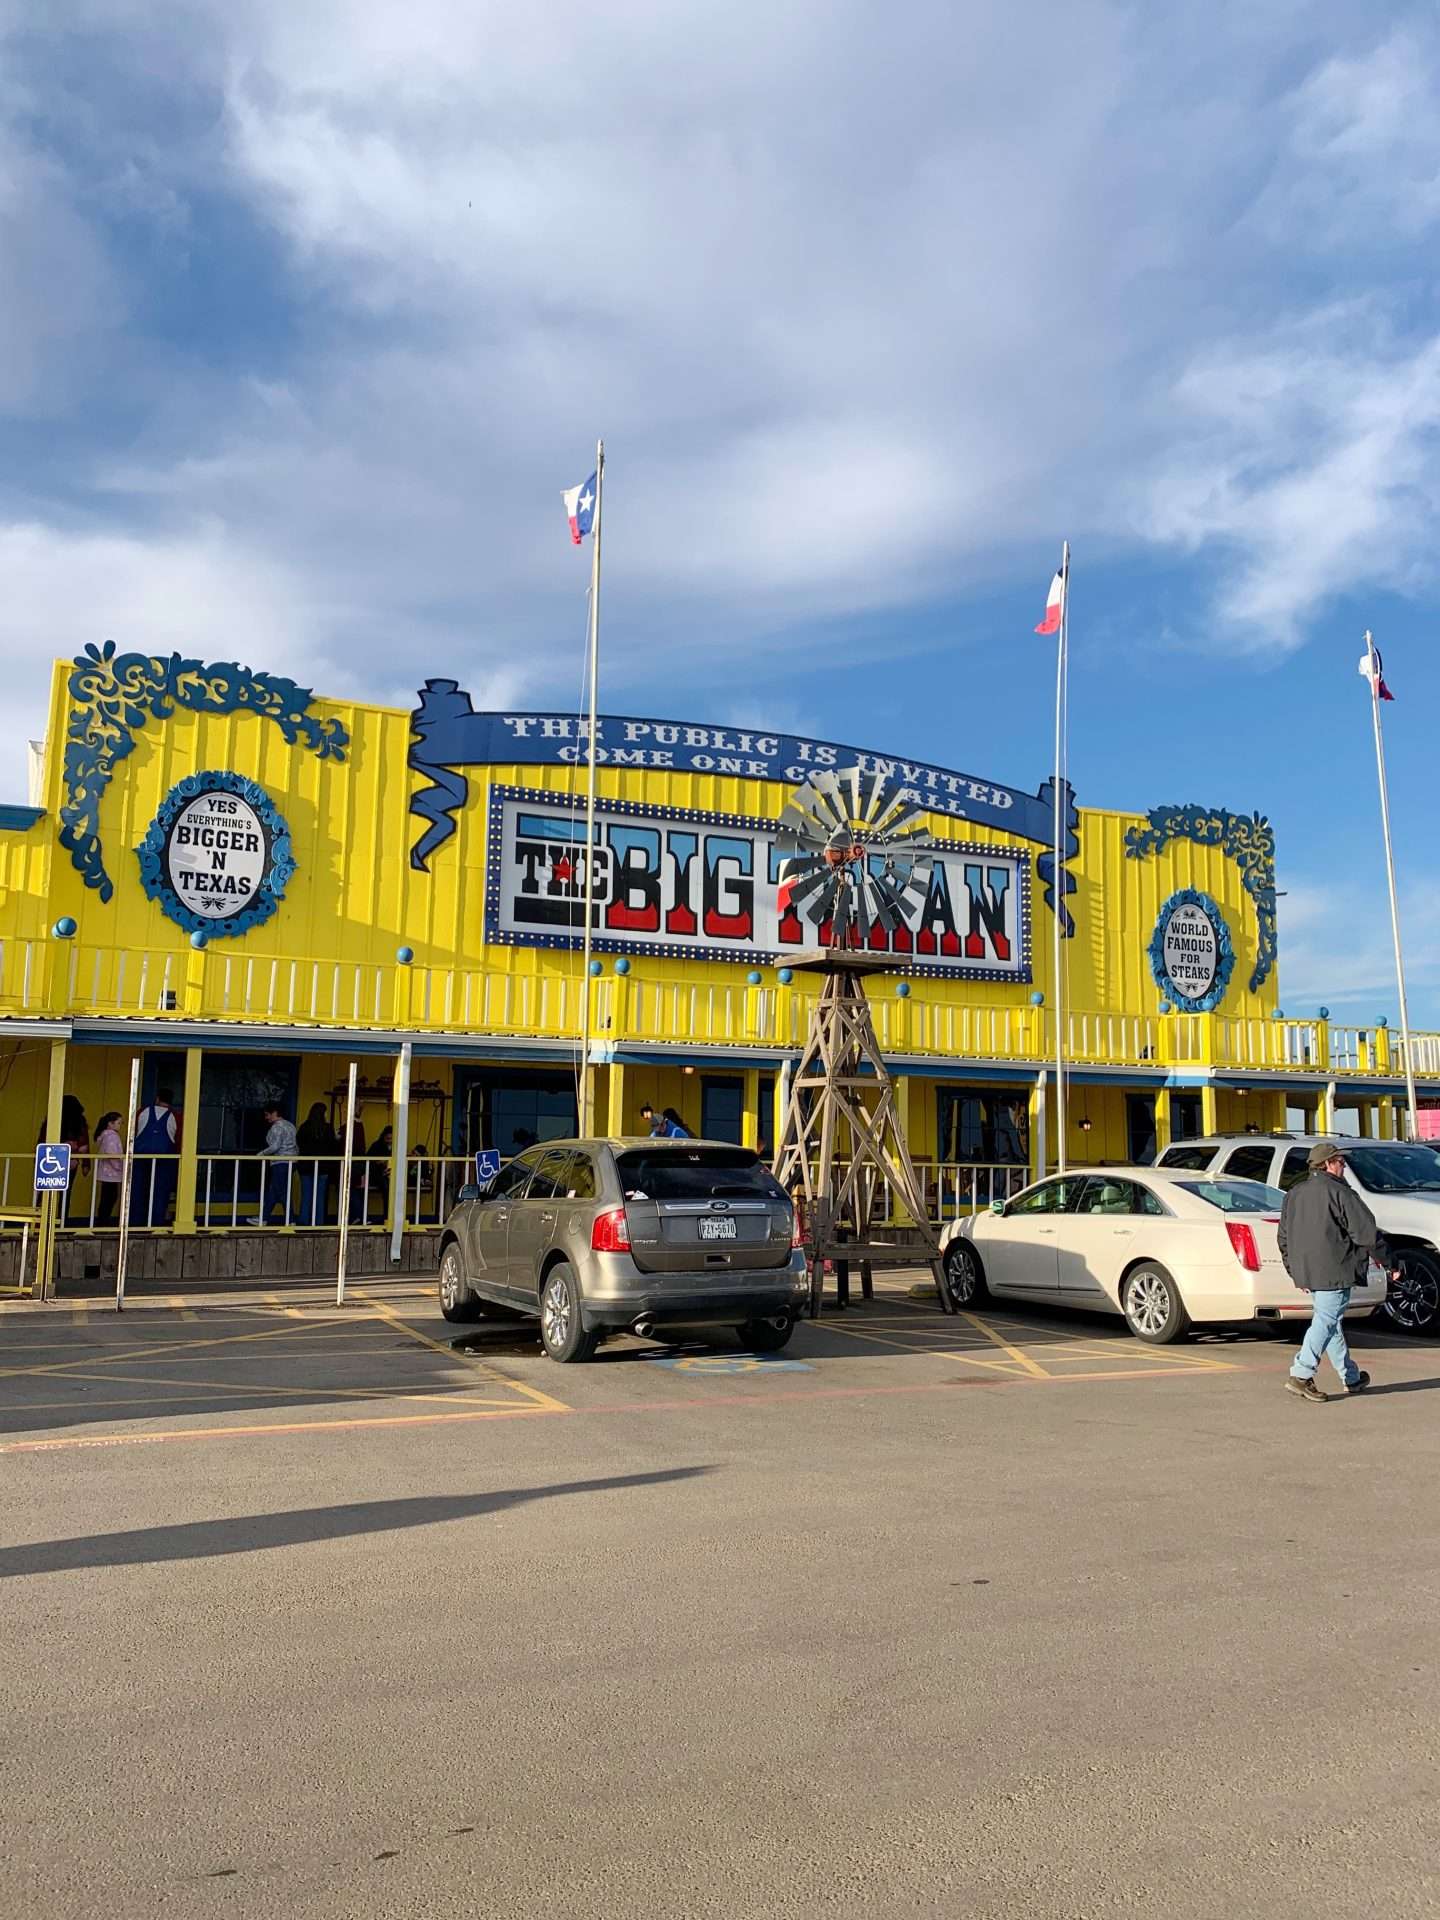 Things to do in Amarillo, Texas: Have a meal at the Big Texan.